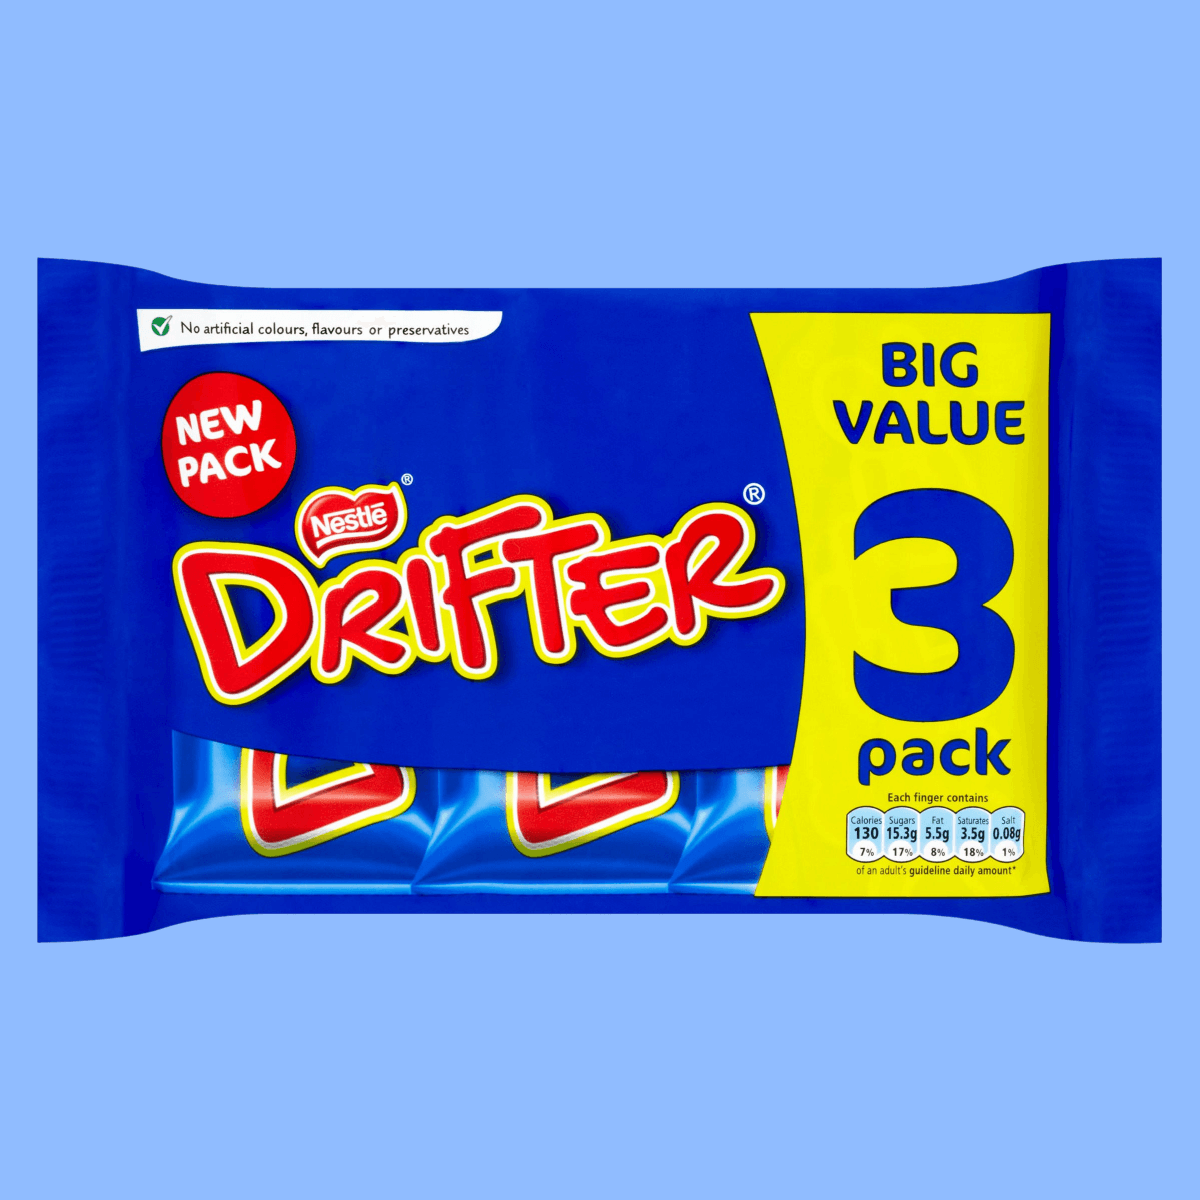 Drifter chocolate bars 3 pack from 2017, with blue wrapper and red and yellow logo text